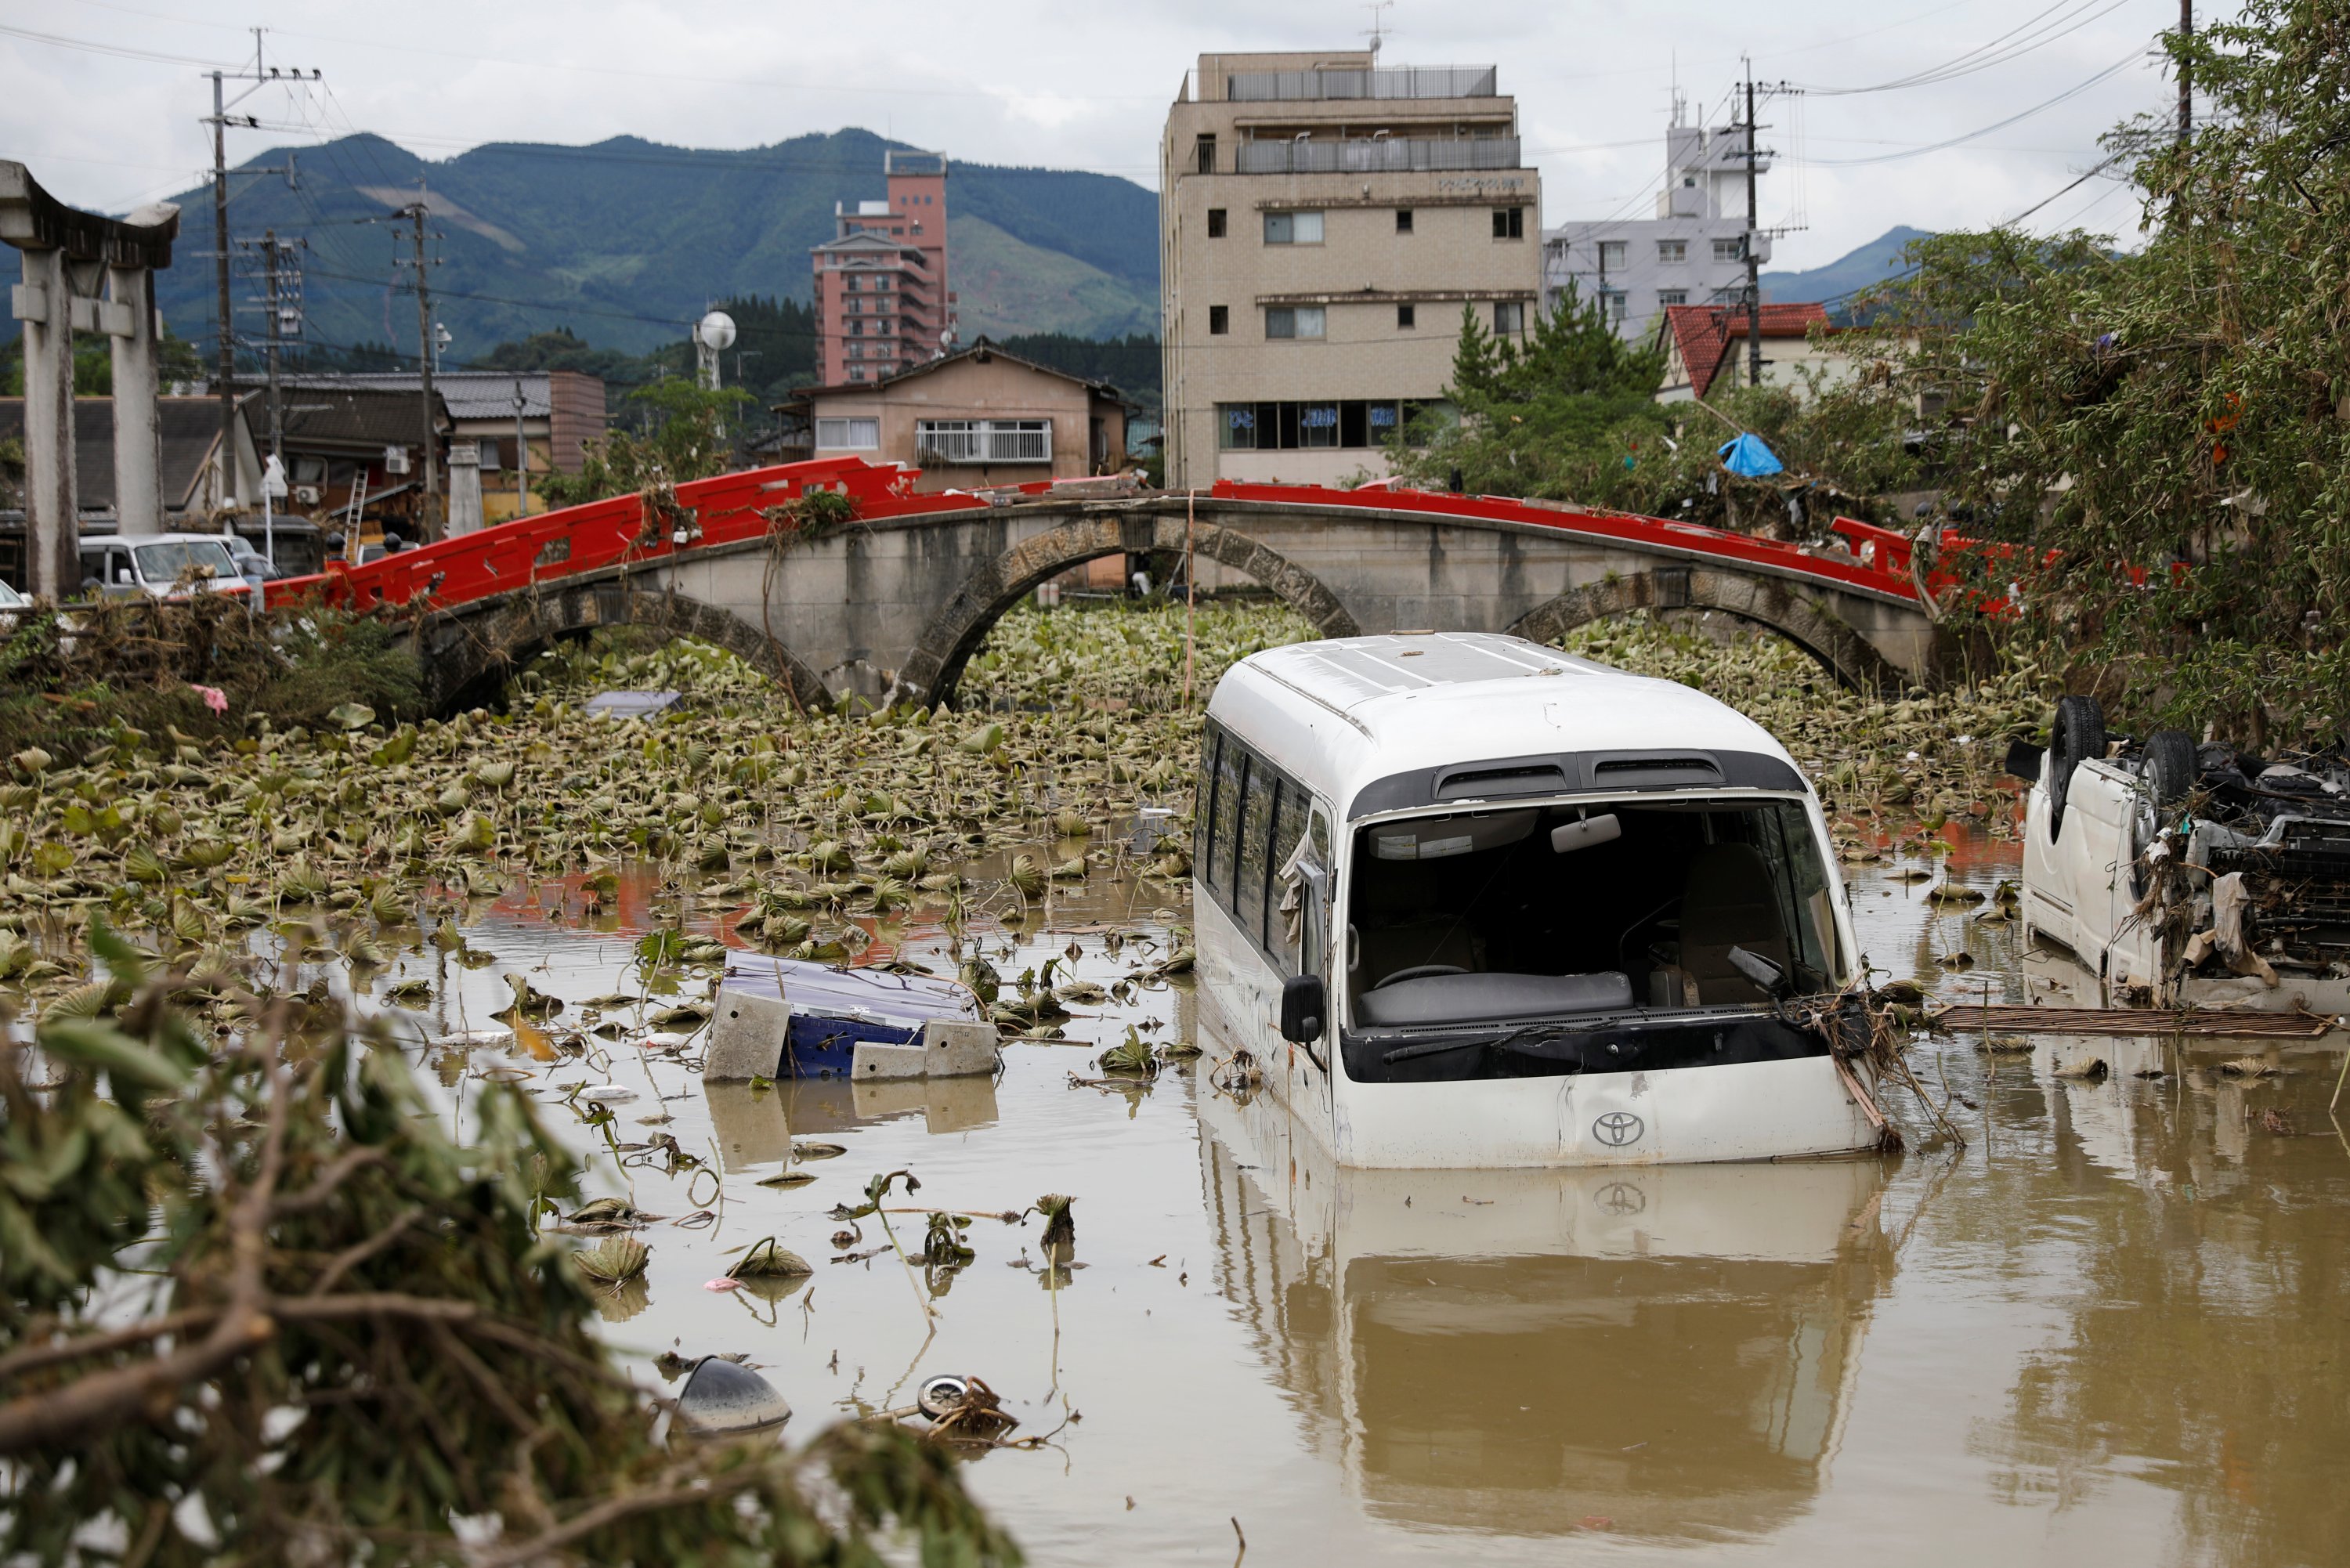 A broken bridge is seen in the back, as an overturned vehicle and a partially submerged bus are pictured in floodwaters caused by torrential rain in Hitoyoshi, Kumamoto Prefecture, southwestern Japan, July 8, 2020. (Reuters Photo)